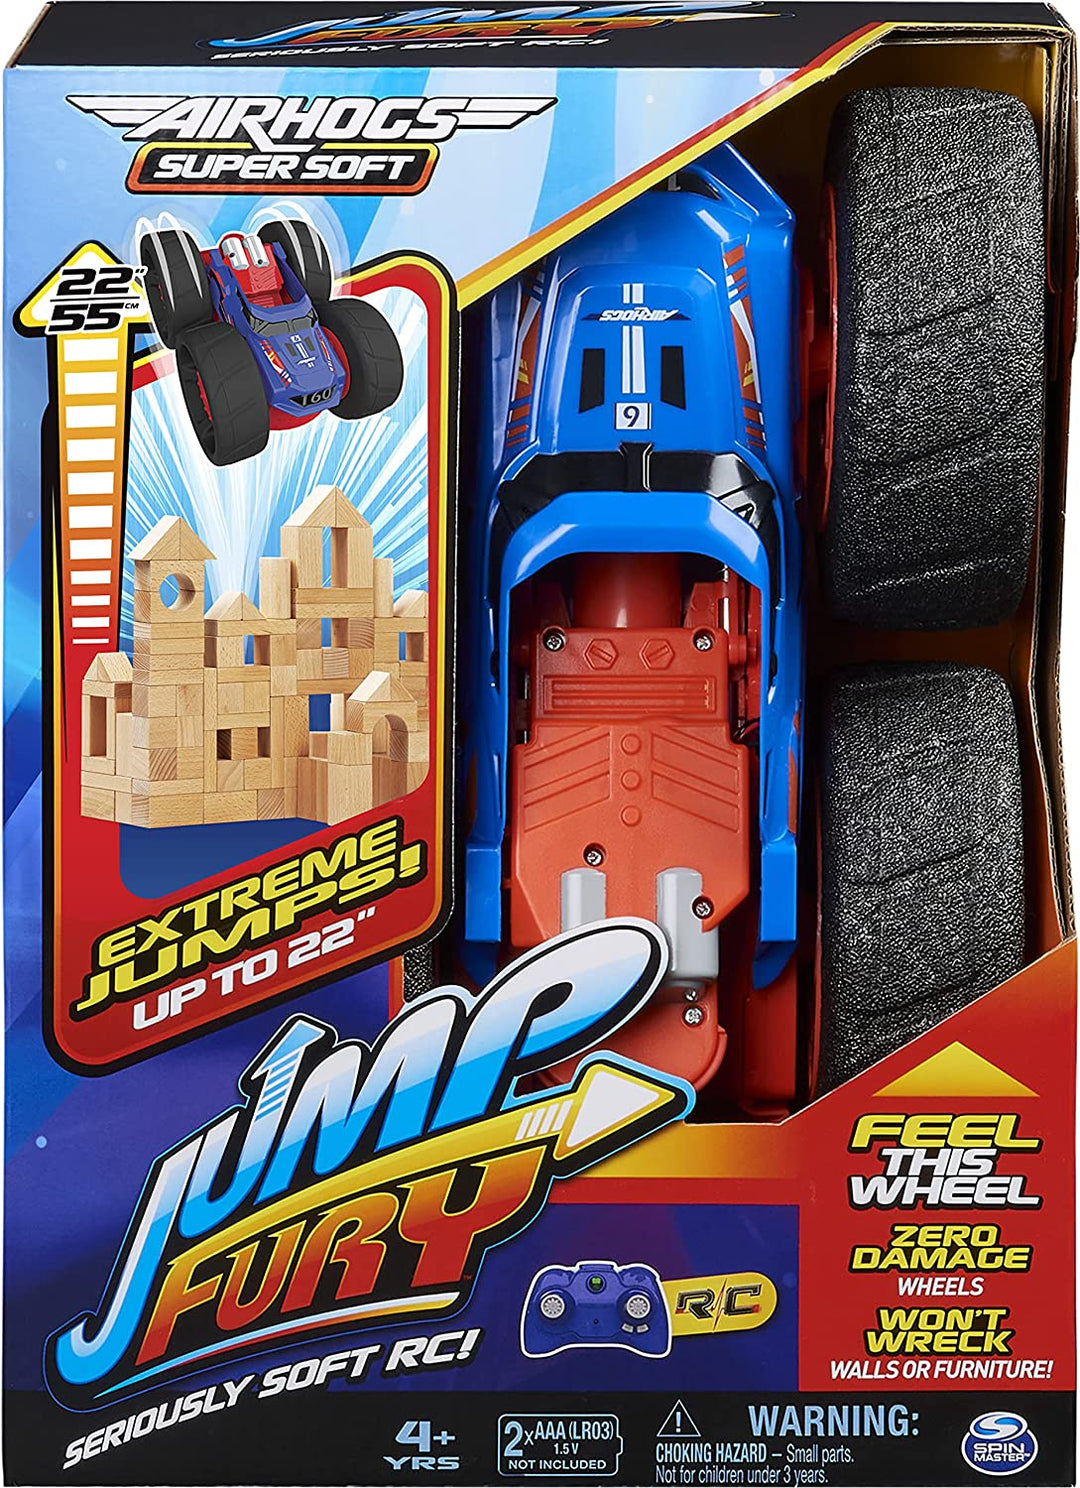 Air Hogs Super Soft, Jump Fury with Zero-Damage Wheels, Extreme Jumping Remote Control Car, Kids’ Toys